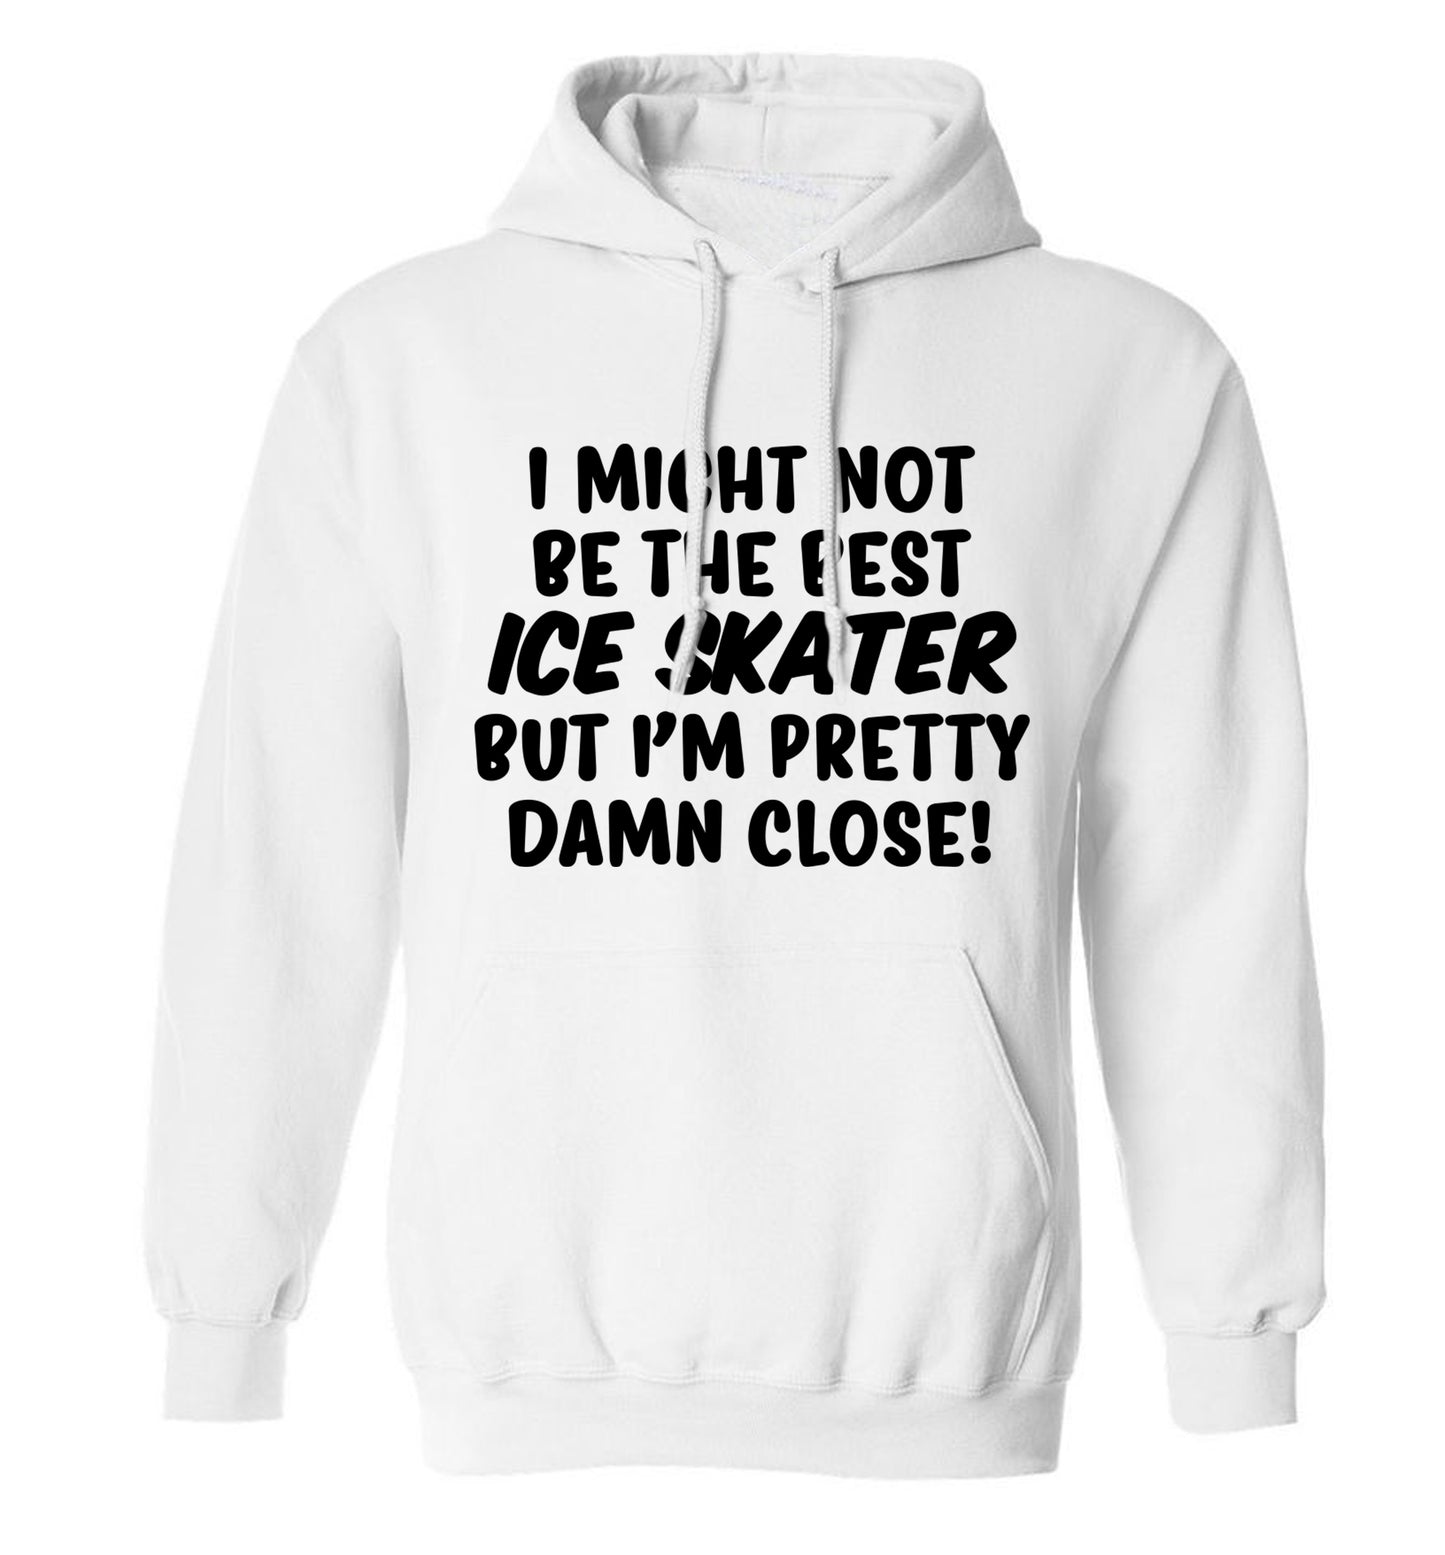 I might not be the best ice skater but I'm pretty damn close! adults unisexwhite hoodie 2XL